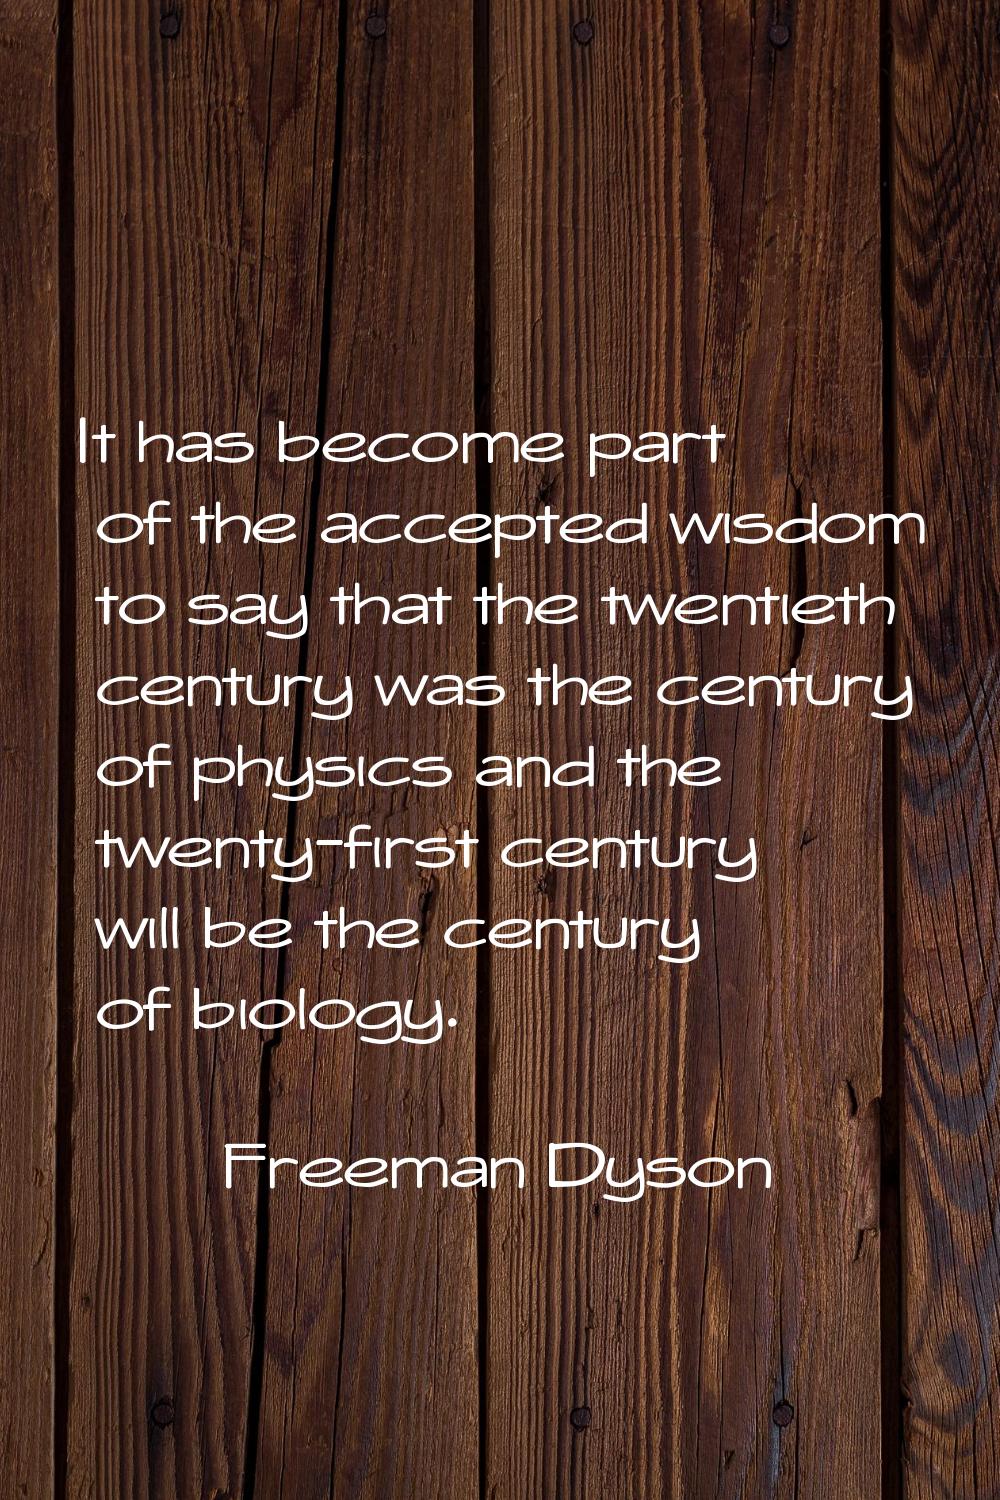 It has become part of the accepted wisdom to say that the twentieth century was the century of phys